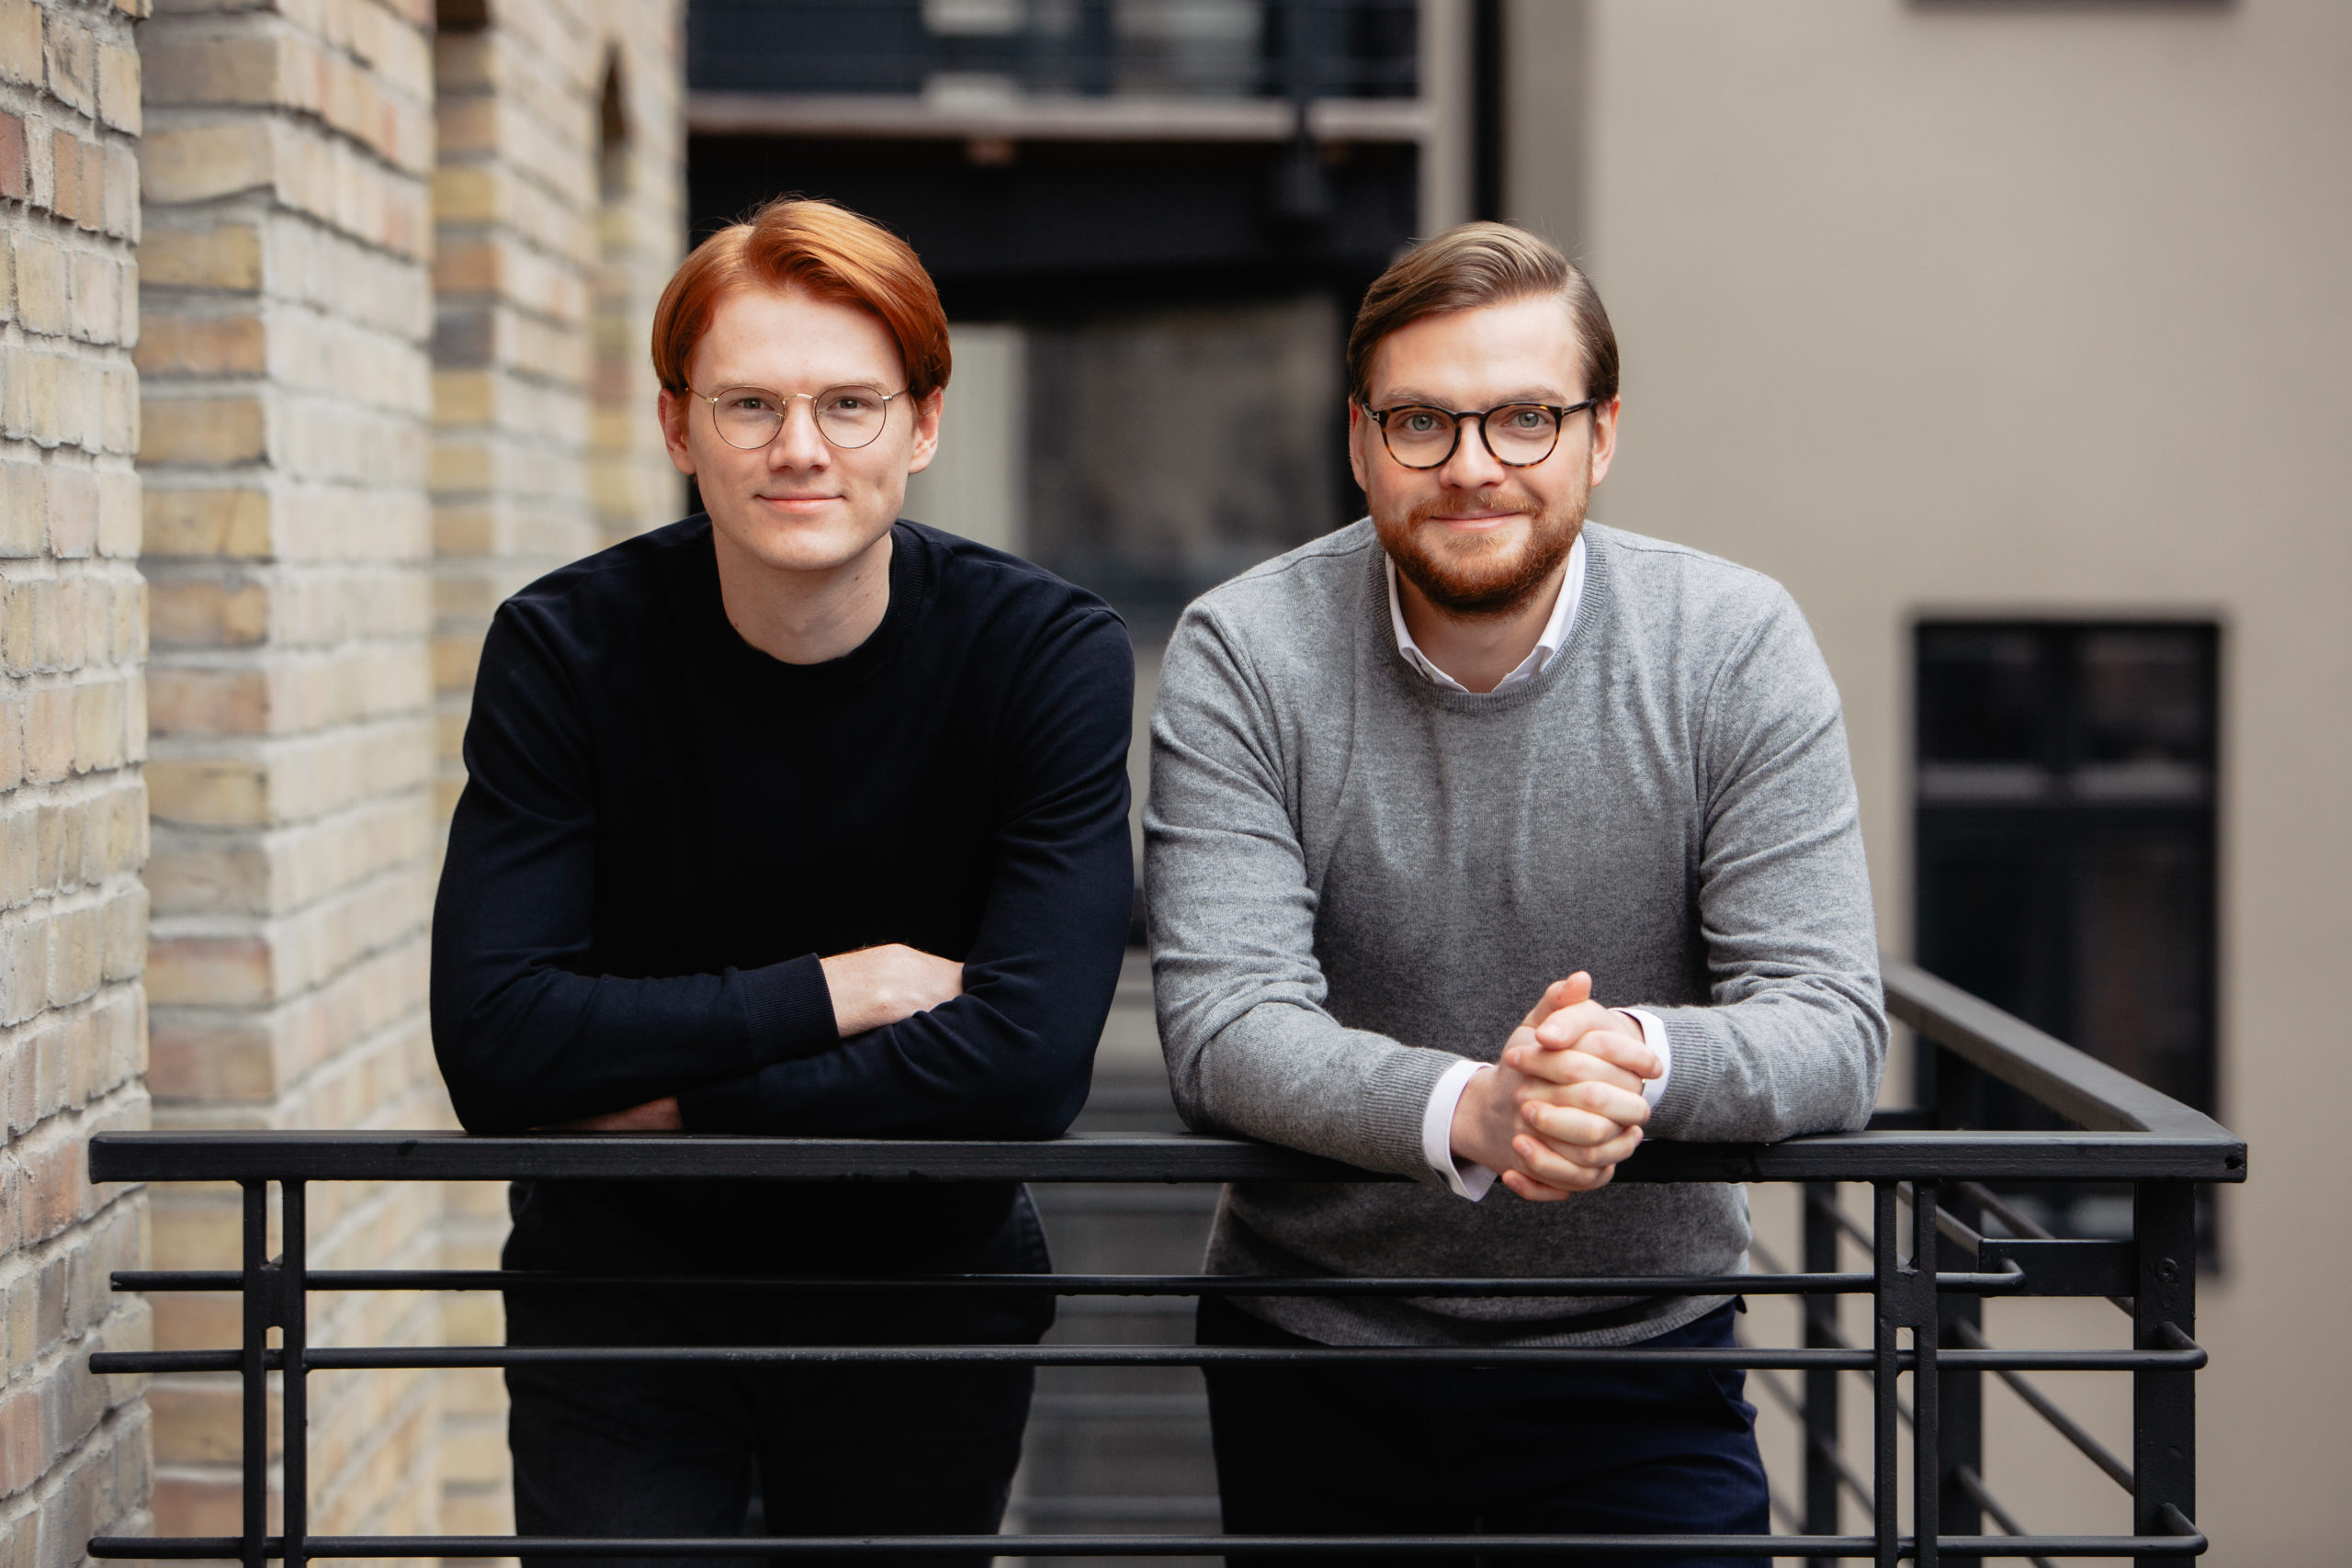 Levity founders Gero Keil & Thilo Huellmann RECEIVED A $8.3 Million Seed funding round